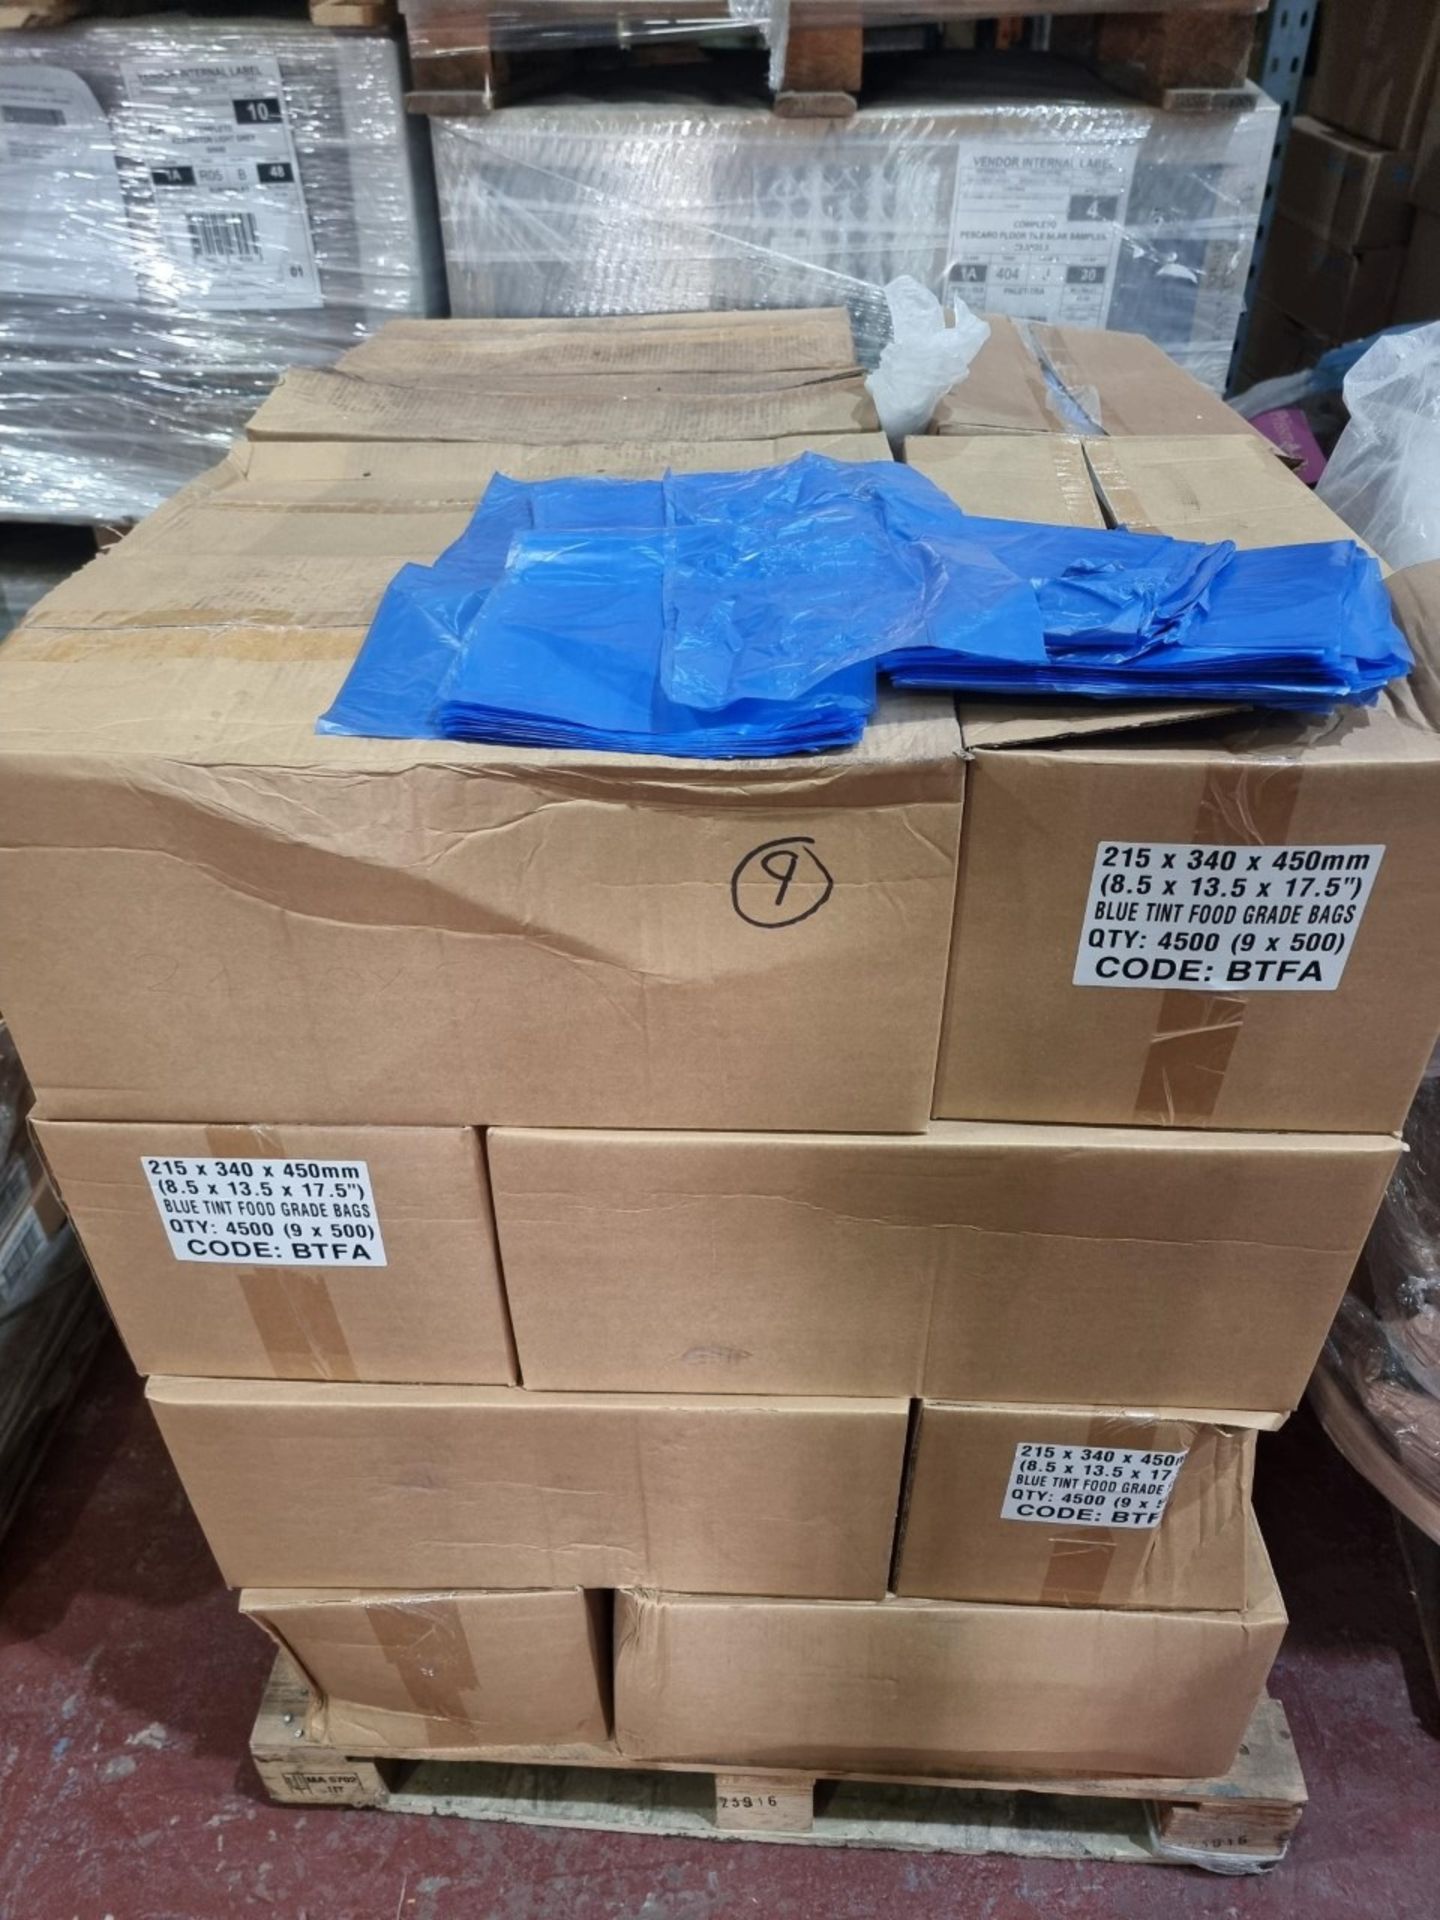 (M17) PALLET TO CONTAIN 5,400 x BLUE TINT FOOD GRADE BAGS. SIZE 215x340x450MM